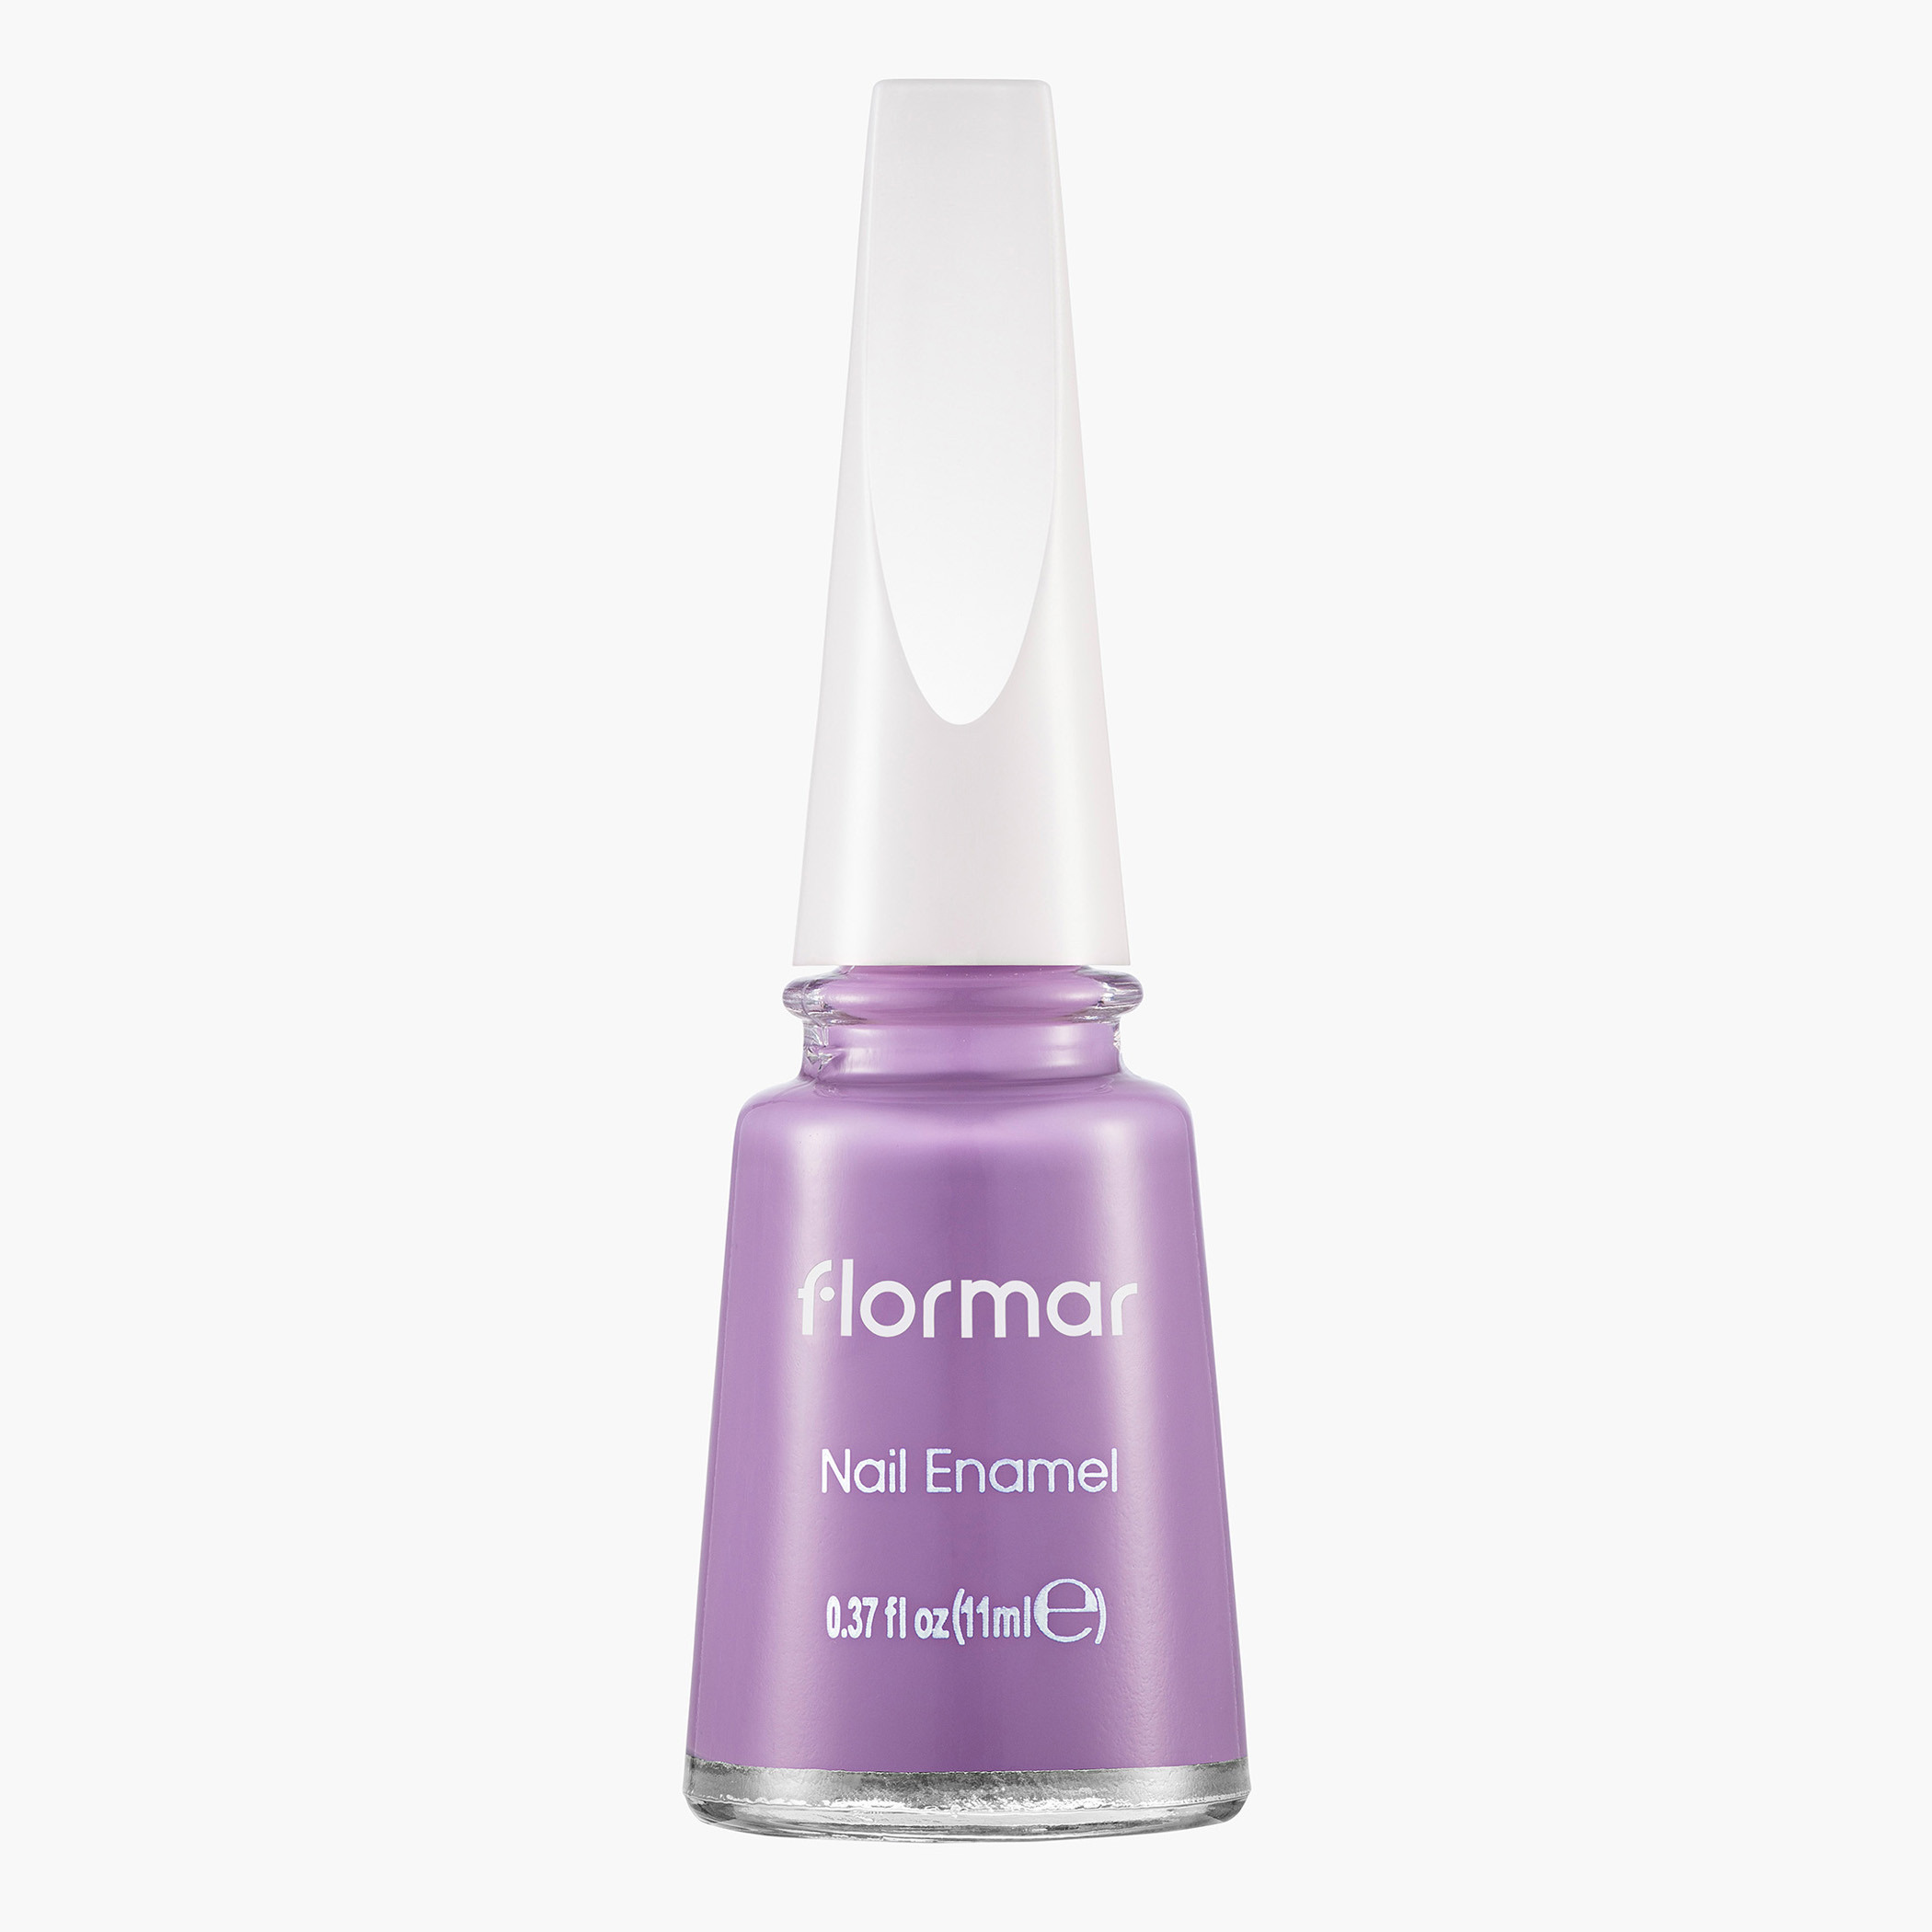 Flormar Malta - Nail-art for your weekend adventures Colour: 497 Celadon  Shop Now and save up to 30%🔗📲 https://bit.ly/flormarmt The different  varieties of Flormar Nail Enamel stay shiny and are long-lasting.  #FlormarMalta #